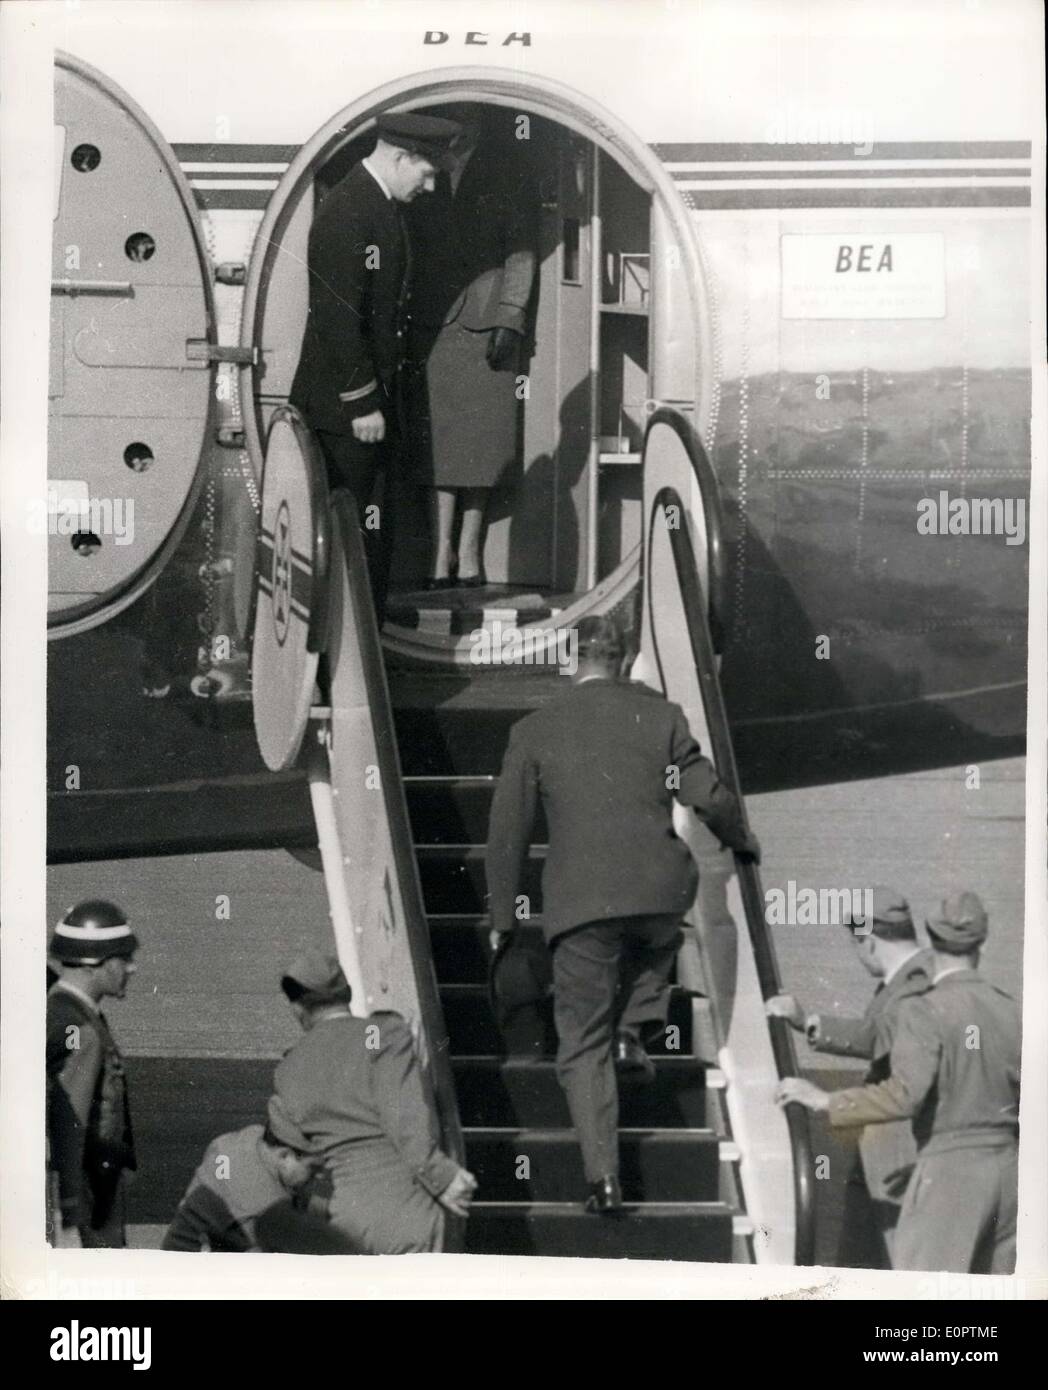 Feb. 18, 1957 - Queen and Duke Reunited: H.M. The Queen and The Duke of Edinburgh who have been parted for four months while the Duke has been on his Commonwealth tour - were reunited on Saturday at Montijo airfield, near Lisbon on Saturday. Their state visit to Portugal starts today (Monday). Photo shows The Duke of Edinburgh enters the aircraft - two steps at a time on the Queen's arrival at Montijo airfield. Stock Photo